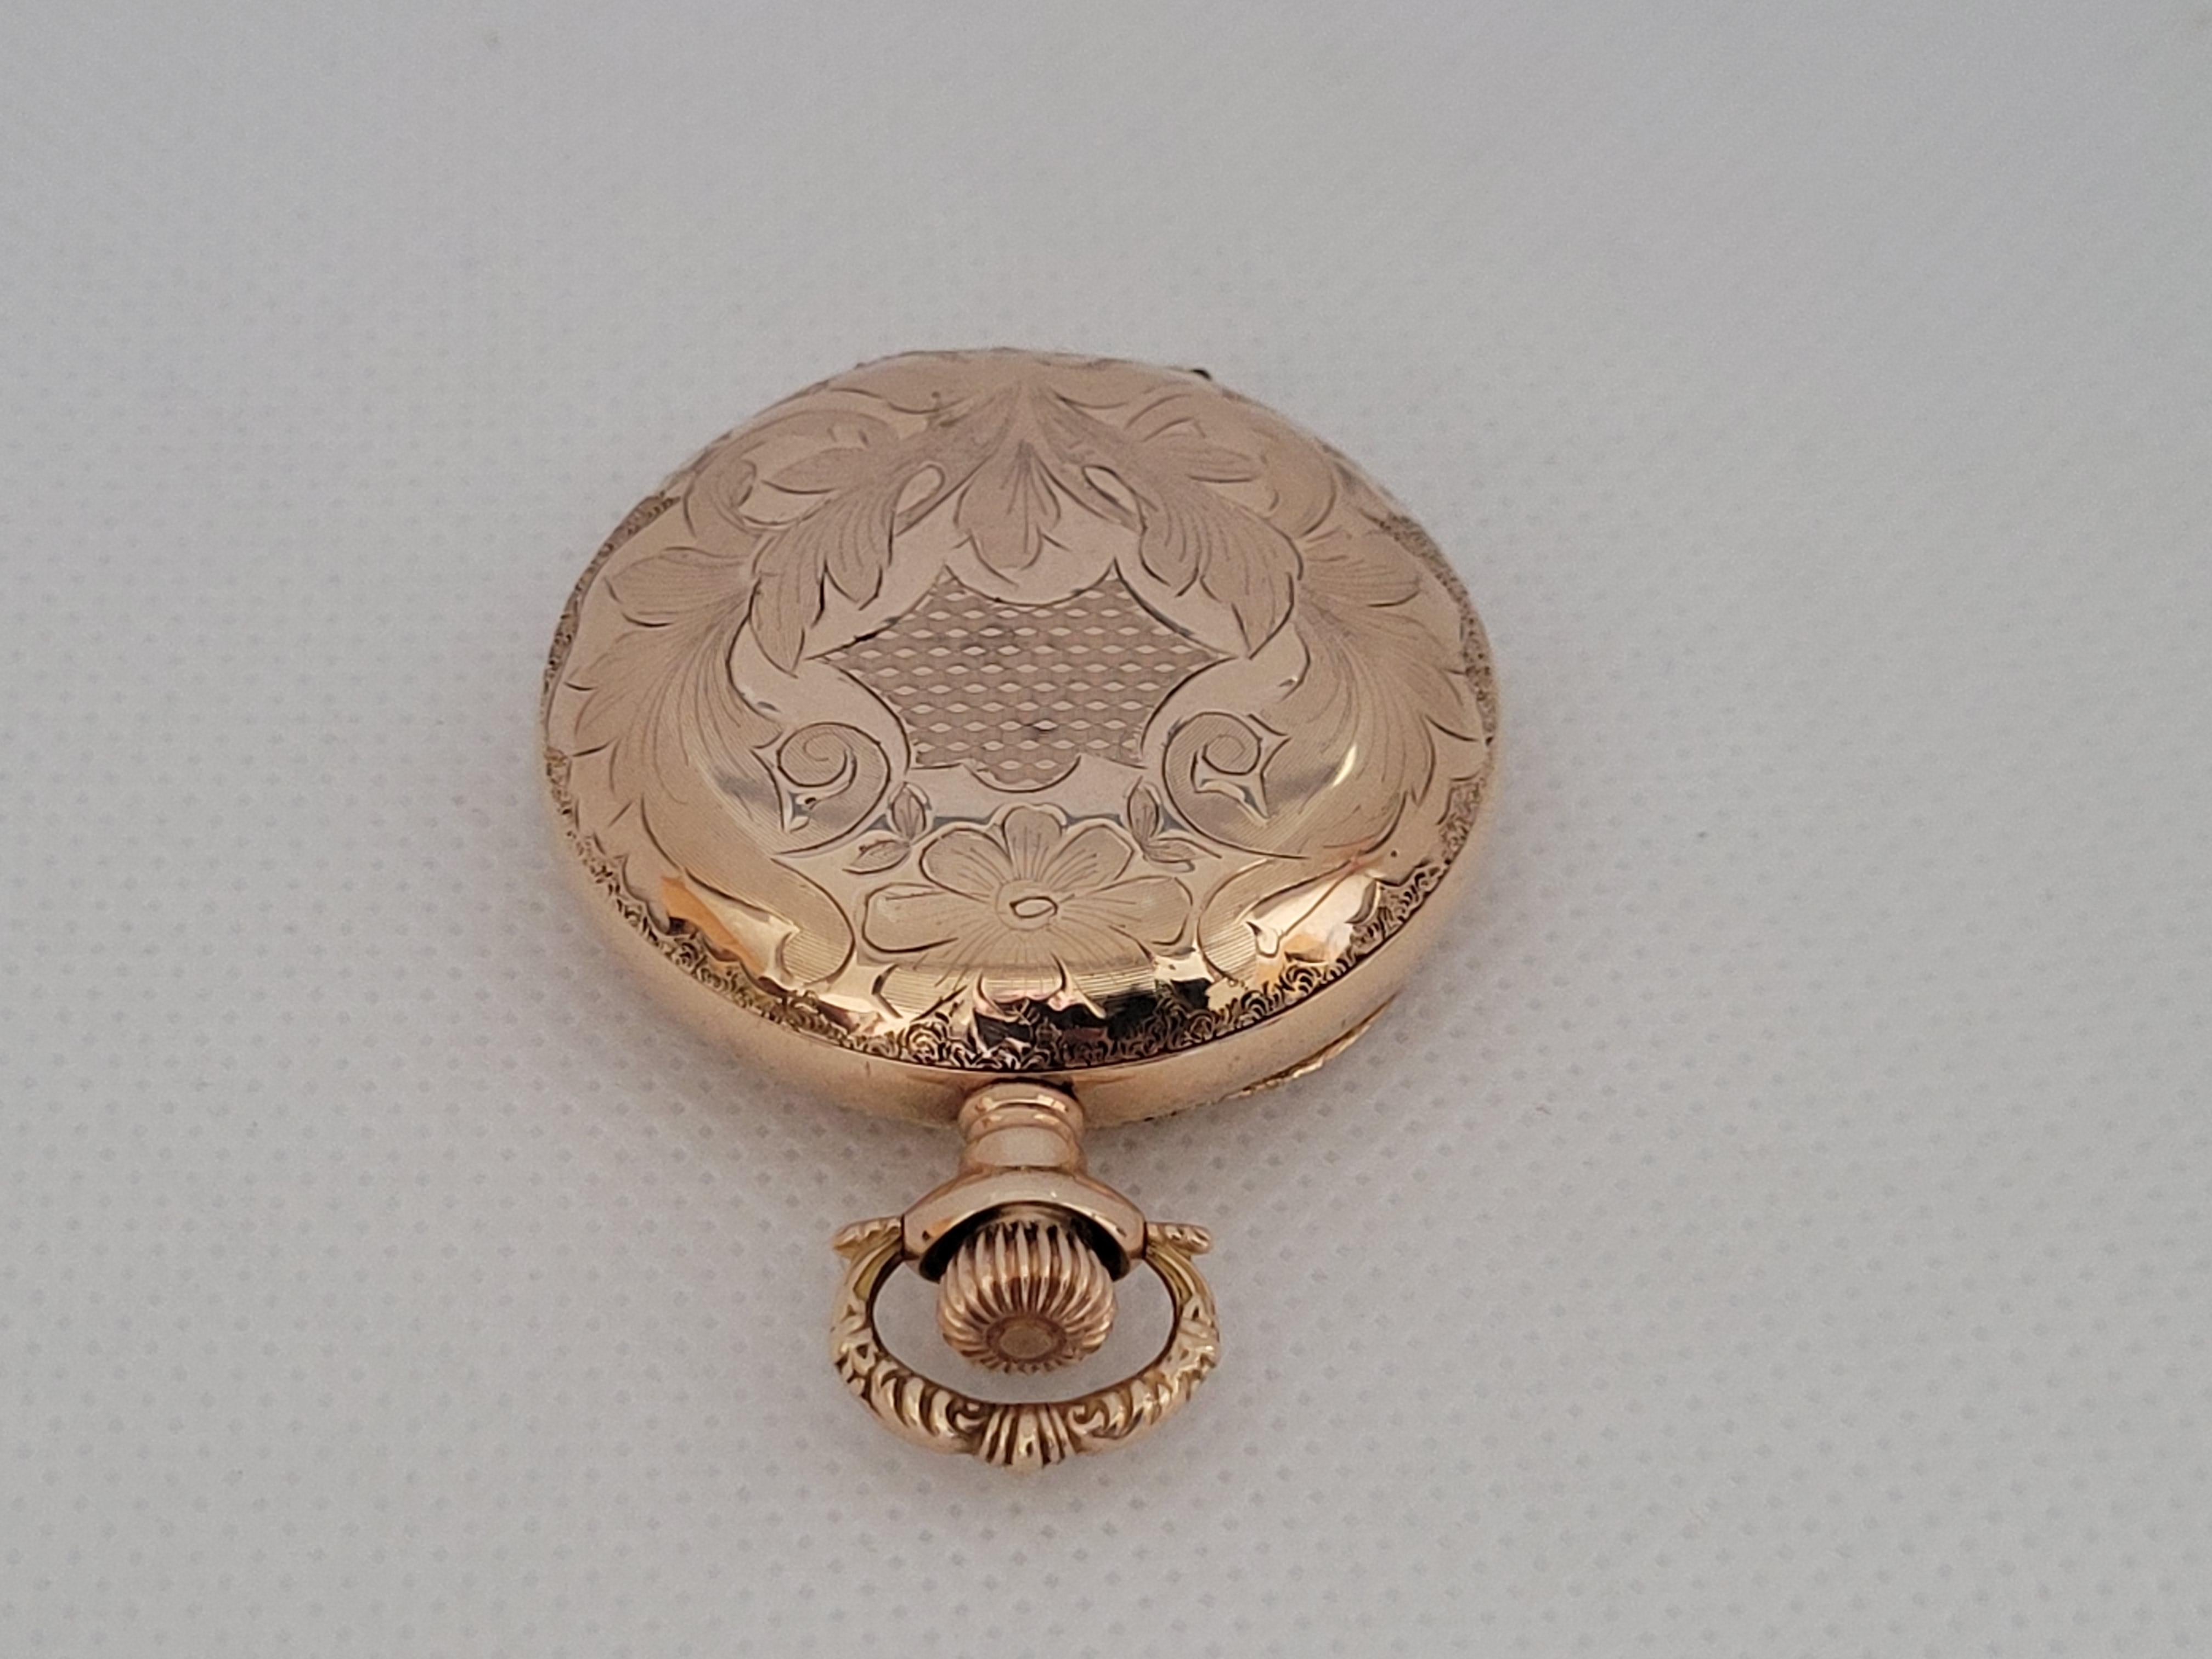 Waltham Pocket Watch Gold Plated Working #16360616 15 Jewels Os Size For Sale 2